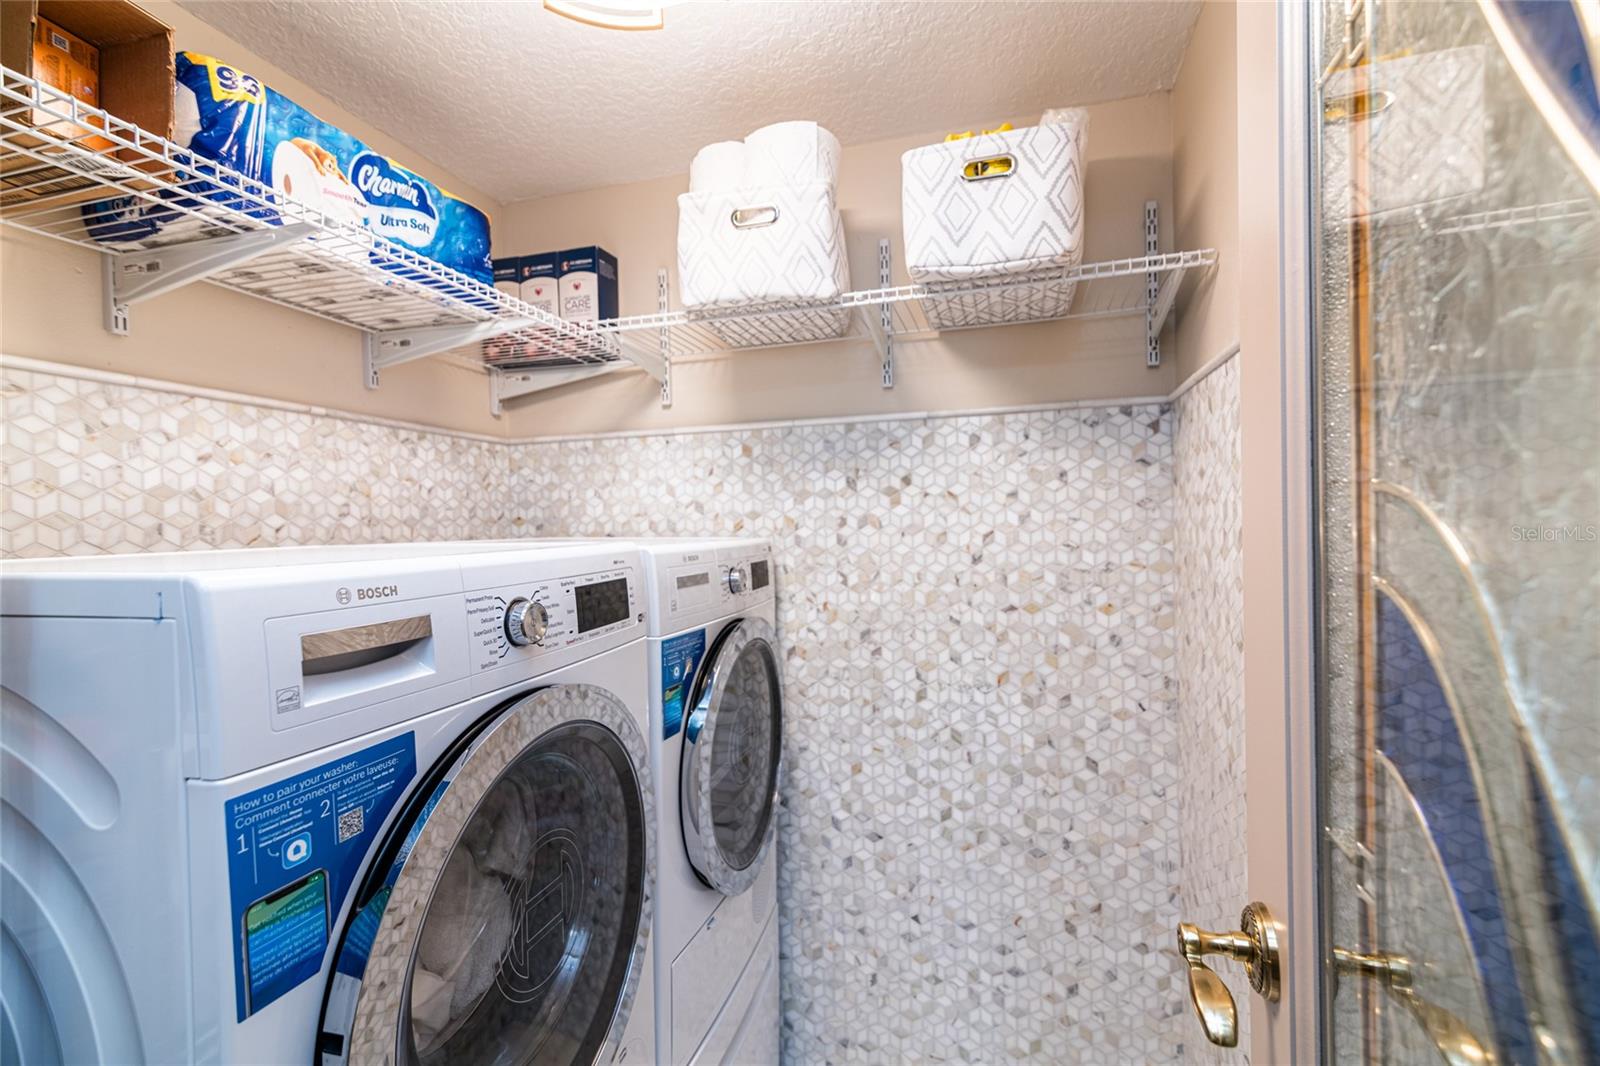 Even the laundry room has new appliances and custom tile work.